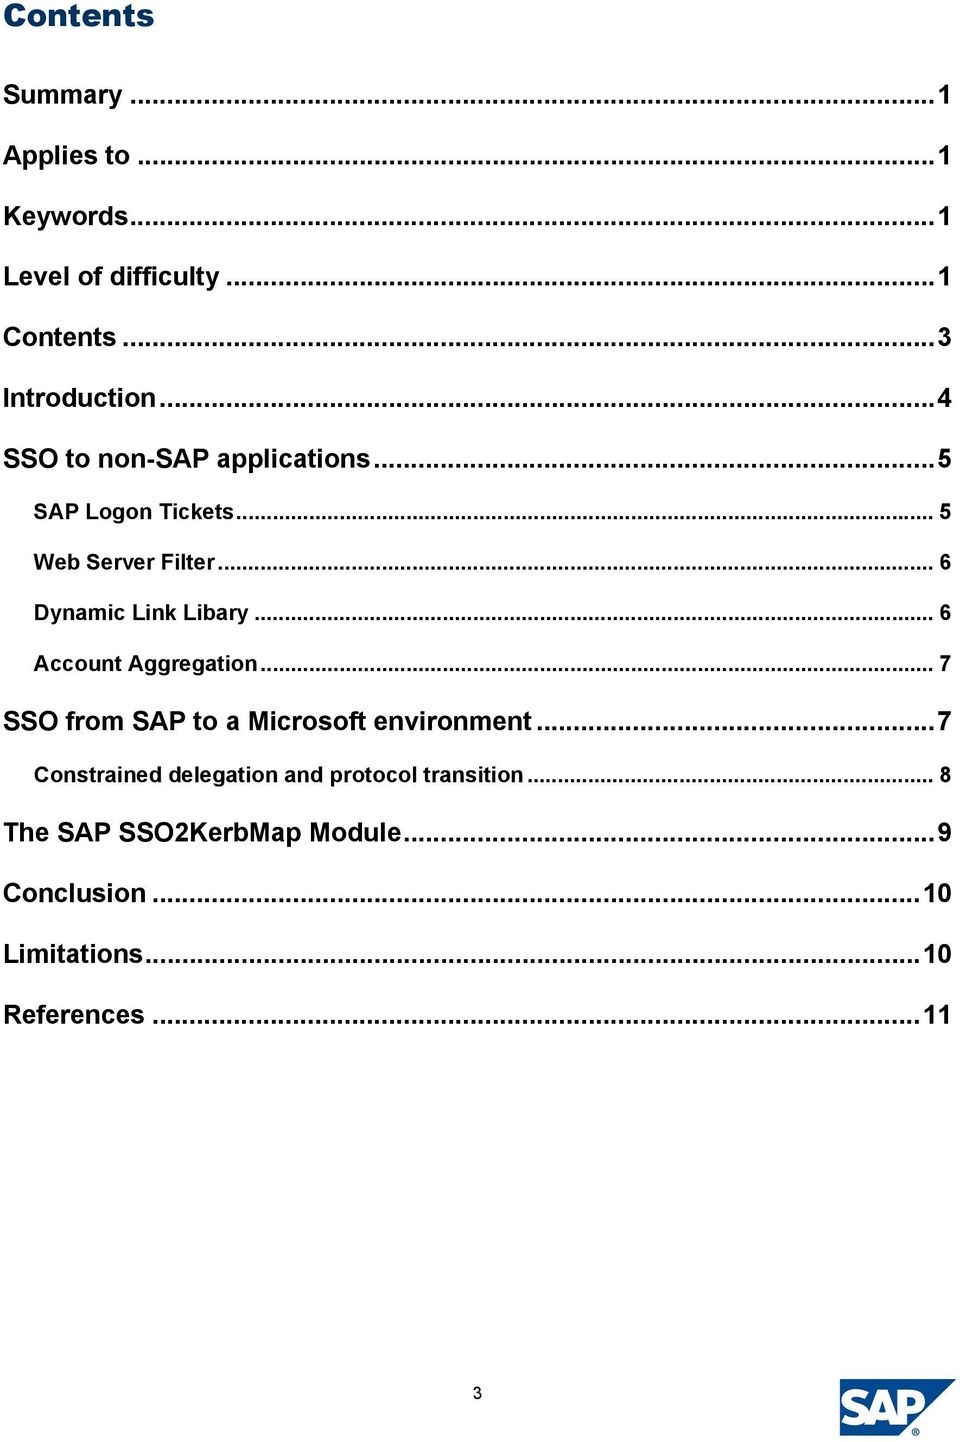 .. 6 Account Aggregation... 7 SSO from SAP to a Microsoft environment.